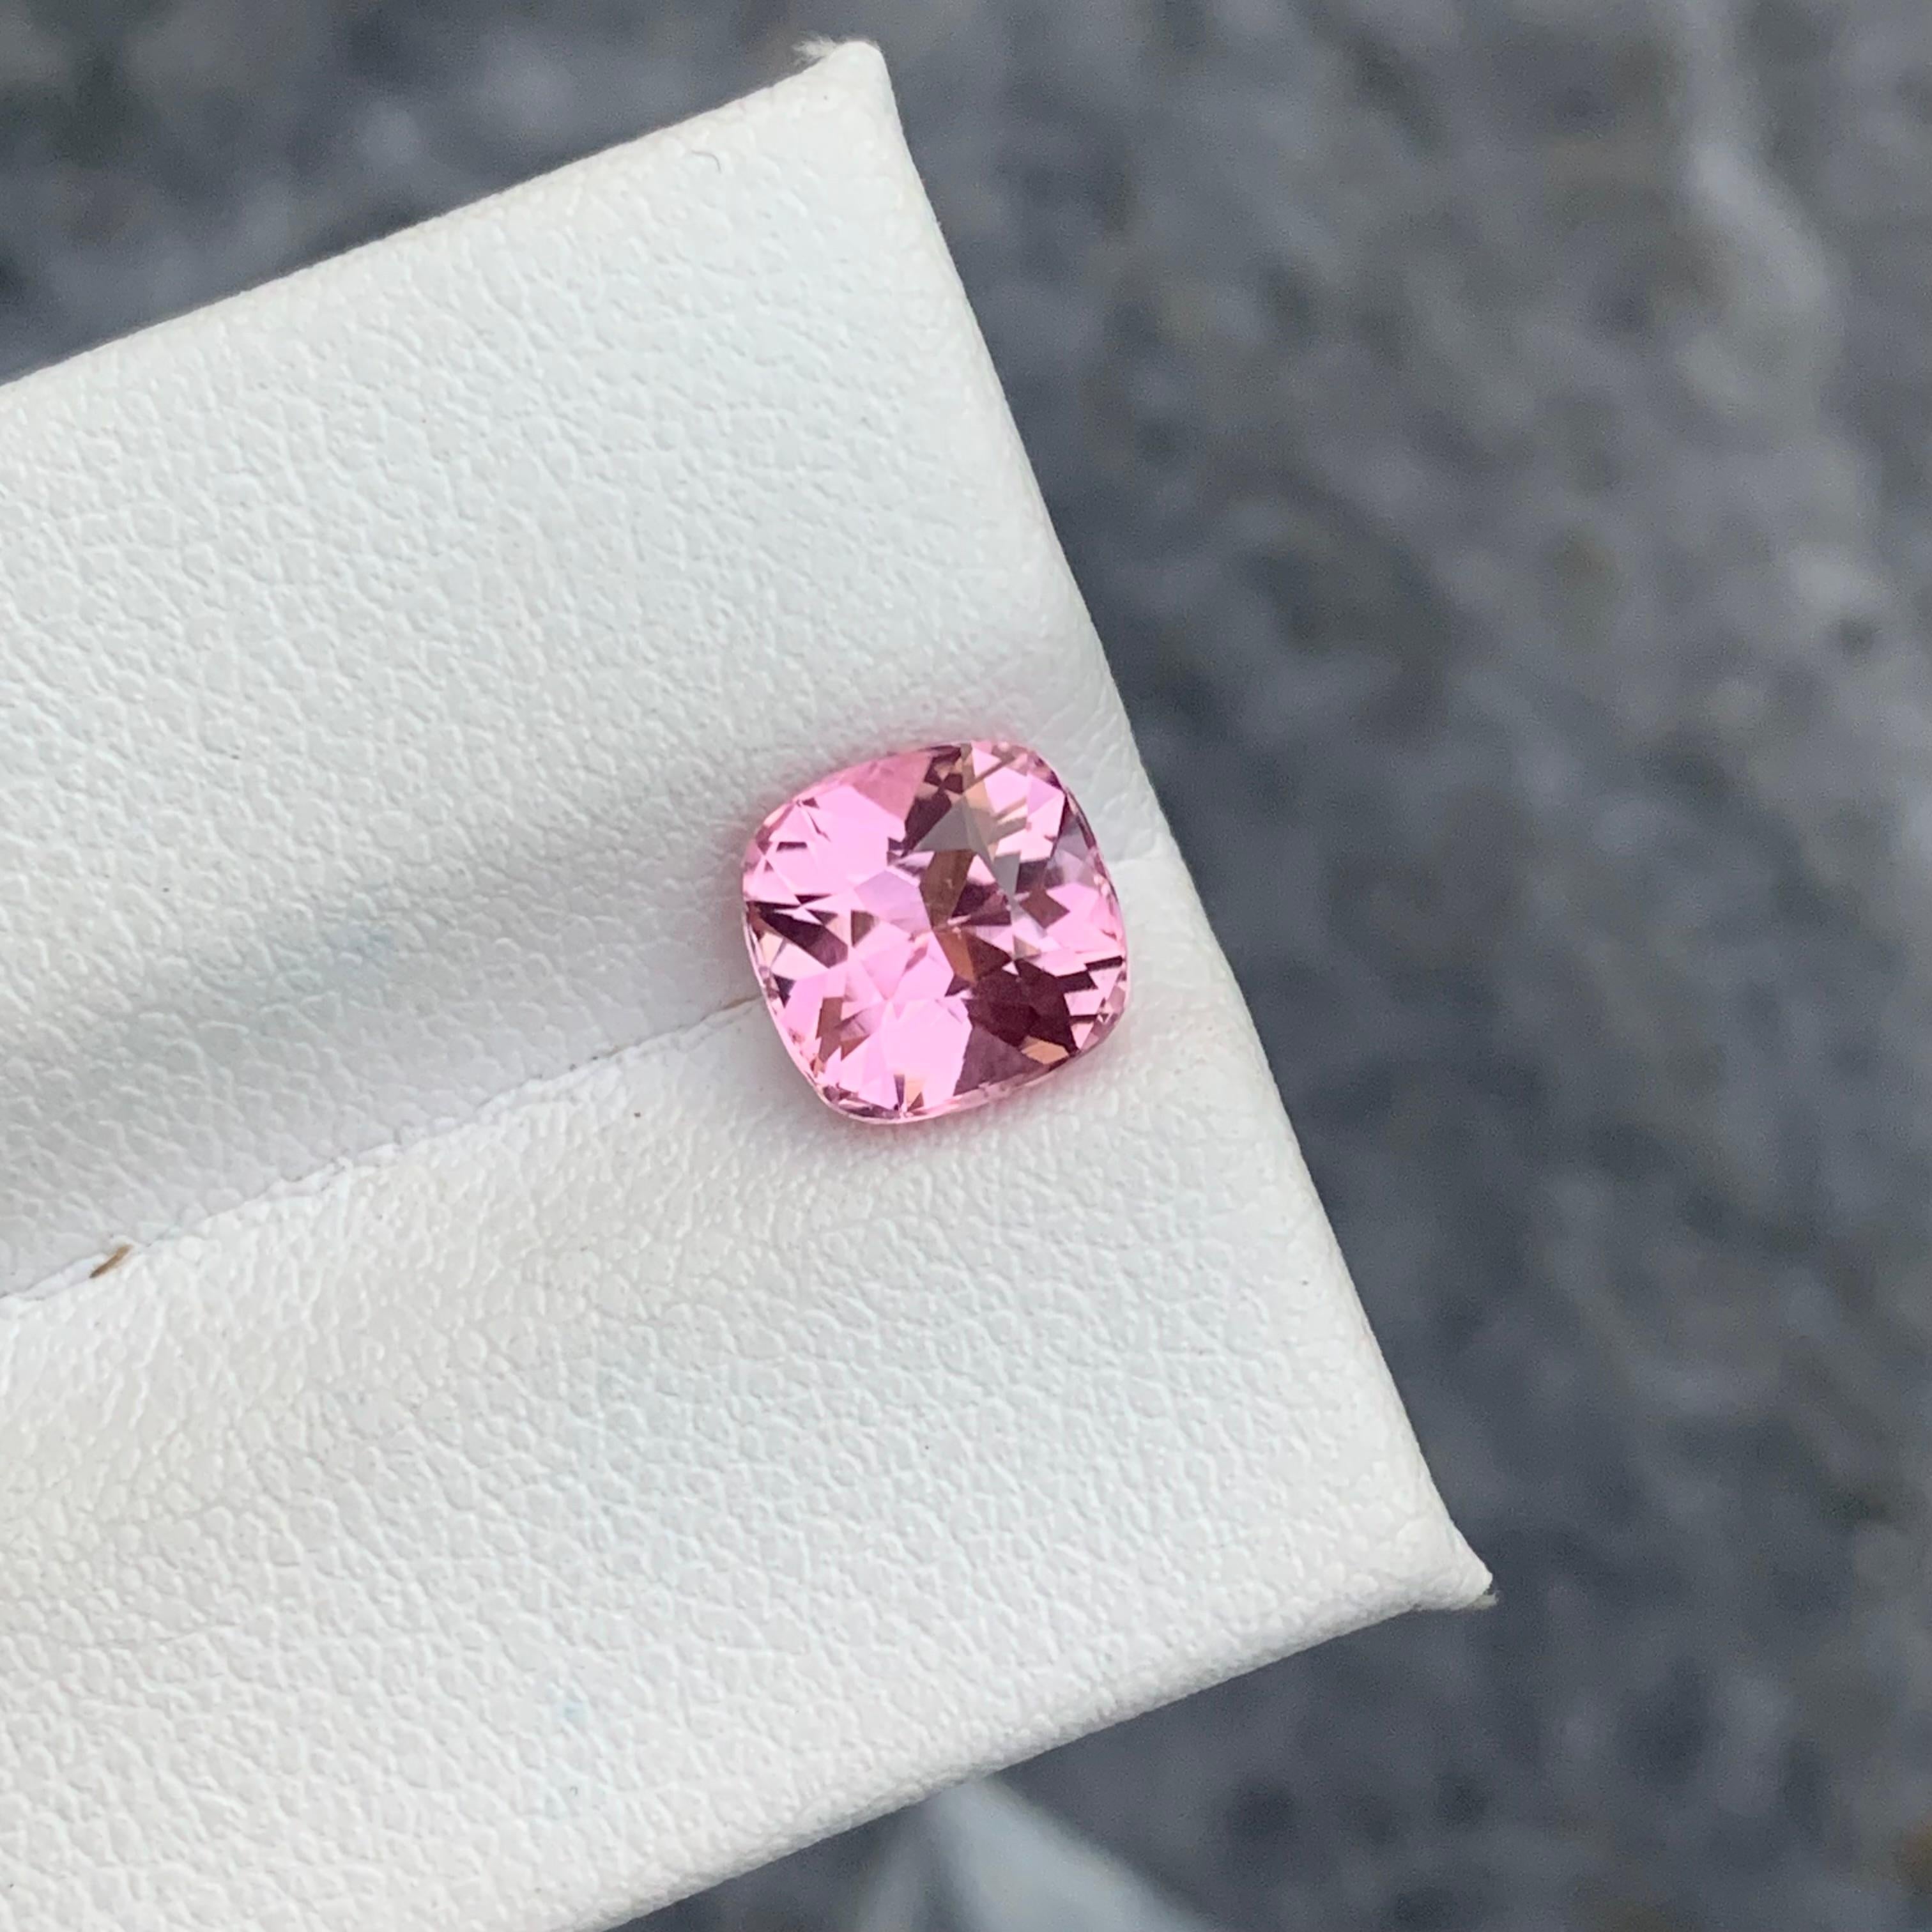 Exceptional 2.0 Carat Natural Loose Baby Pink Tourmaline from Afghan Mine For Sale 1